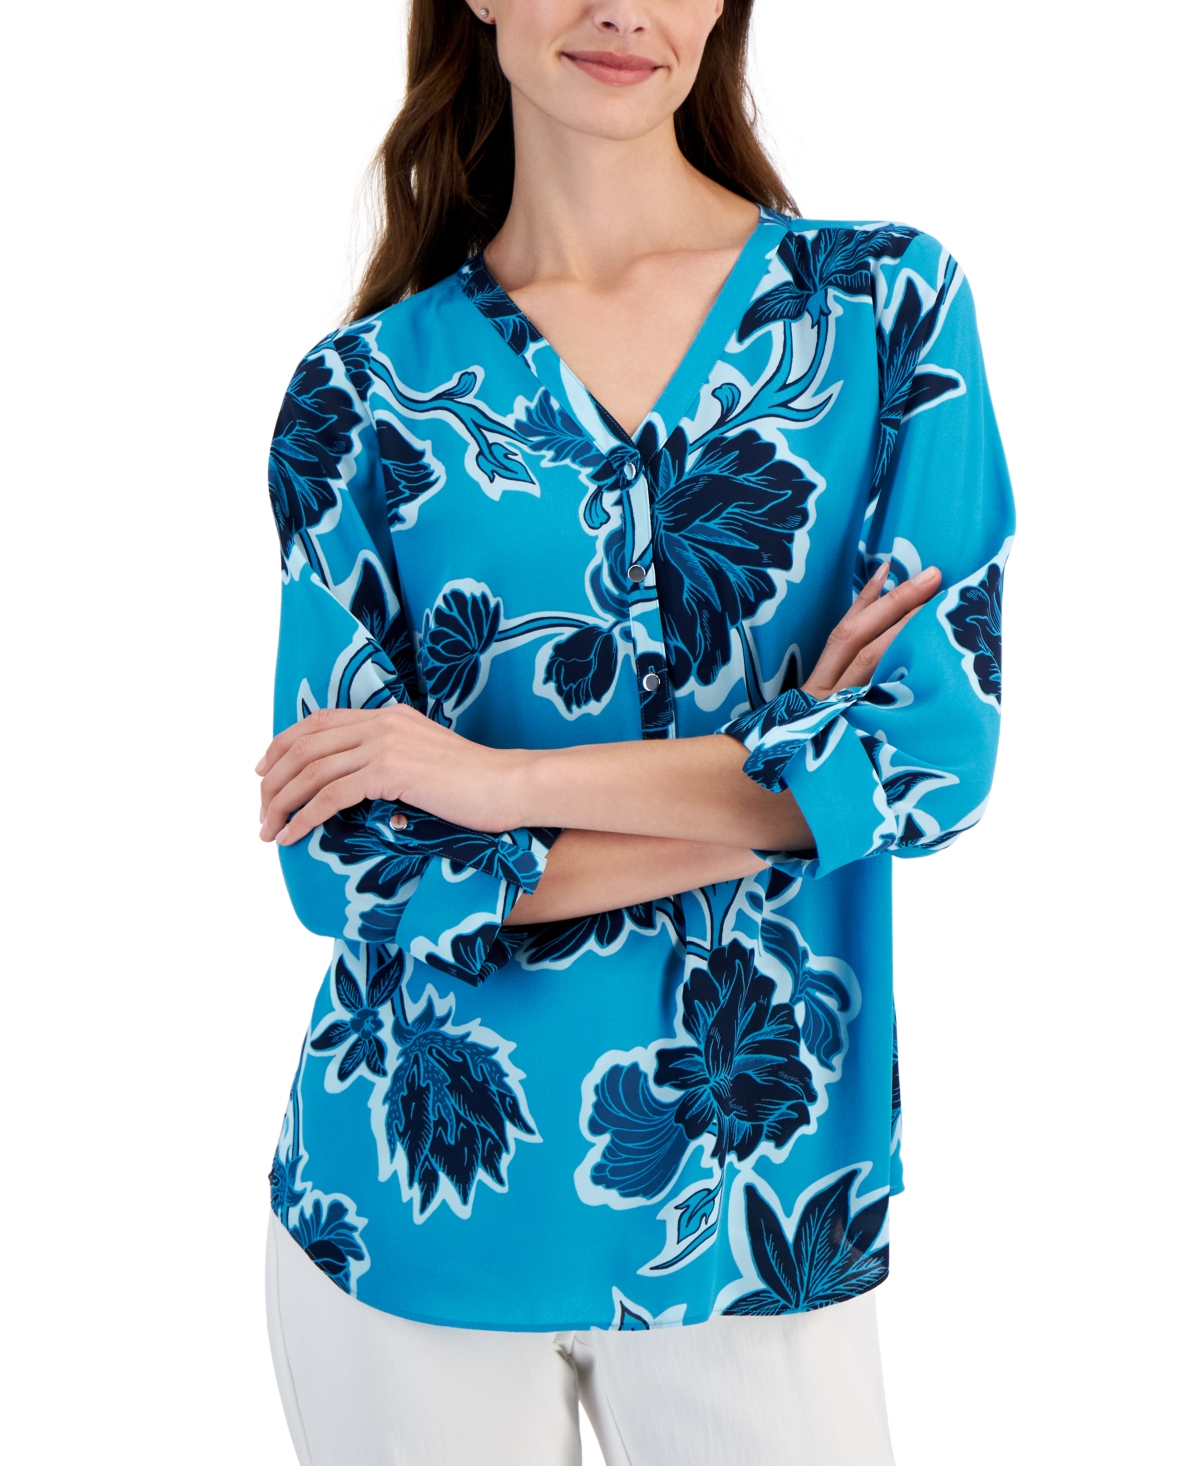 Petite Felicia Floral Roll-Tab Blouse, Created for Macy's - Seafrost Combo